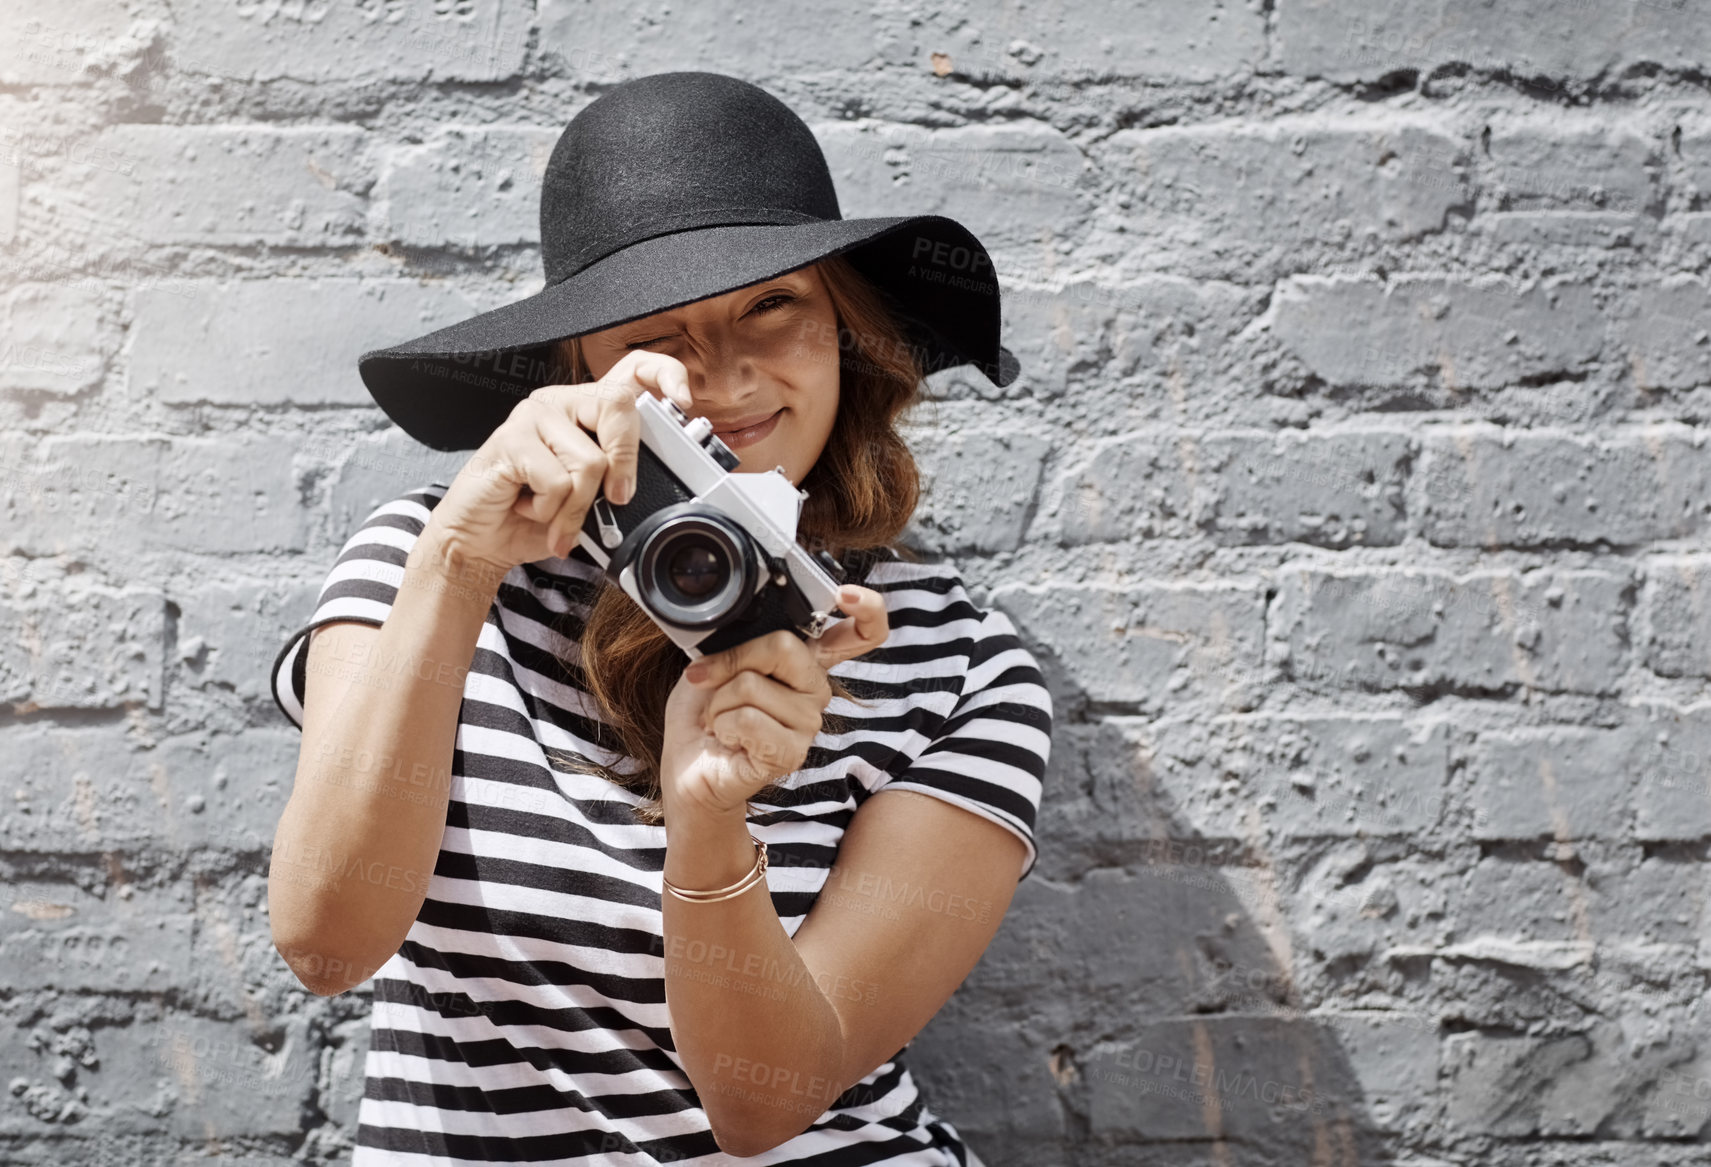 Buy stock photo Shot of a young woman taking a picture with her camera against a brick wall outdoors